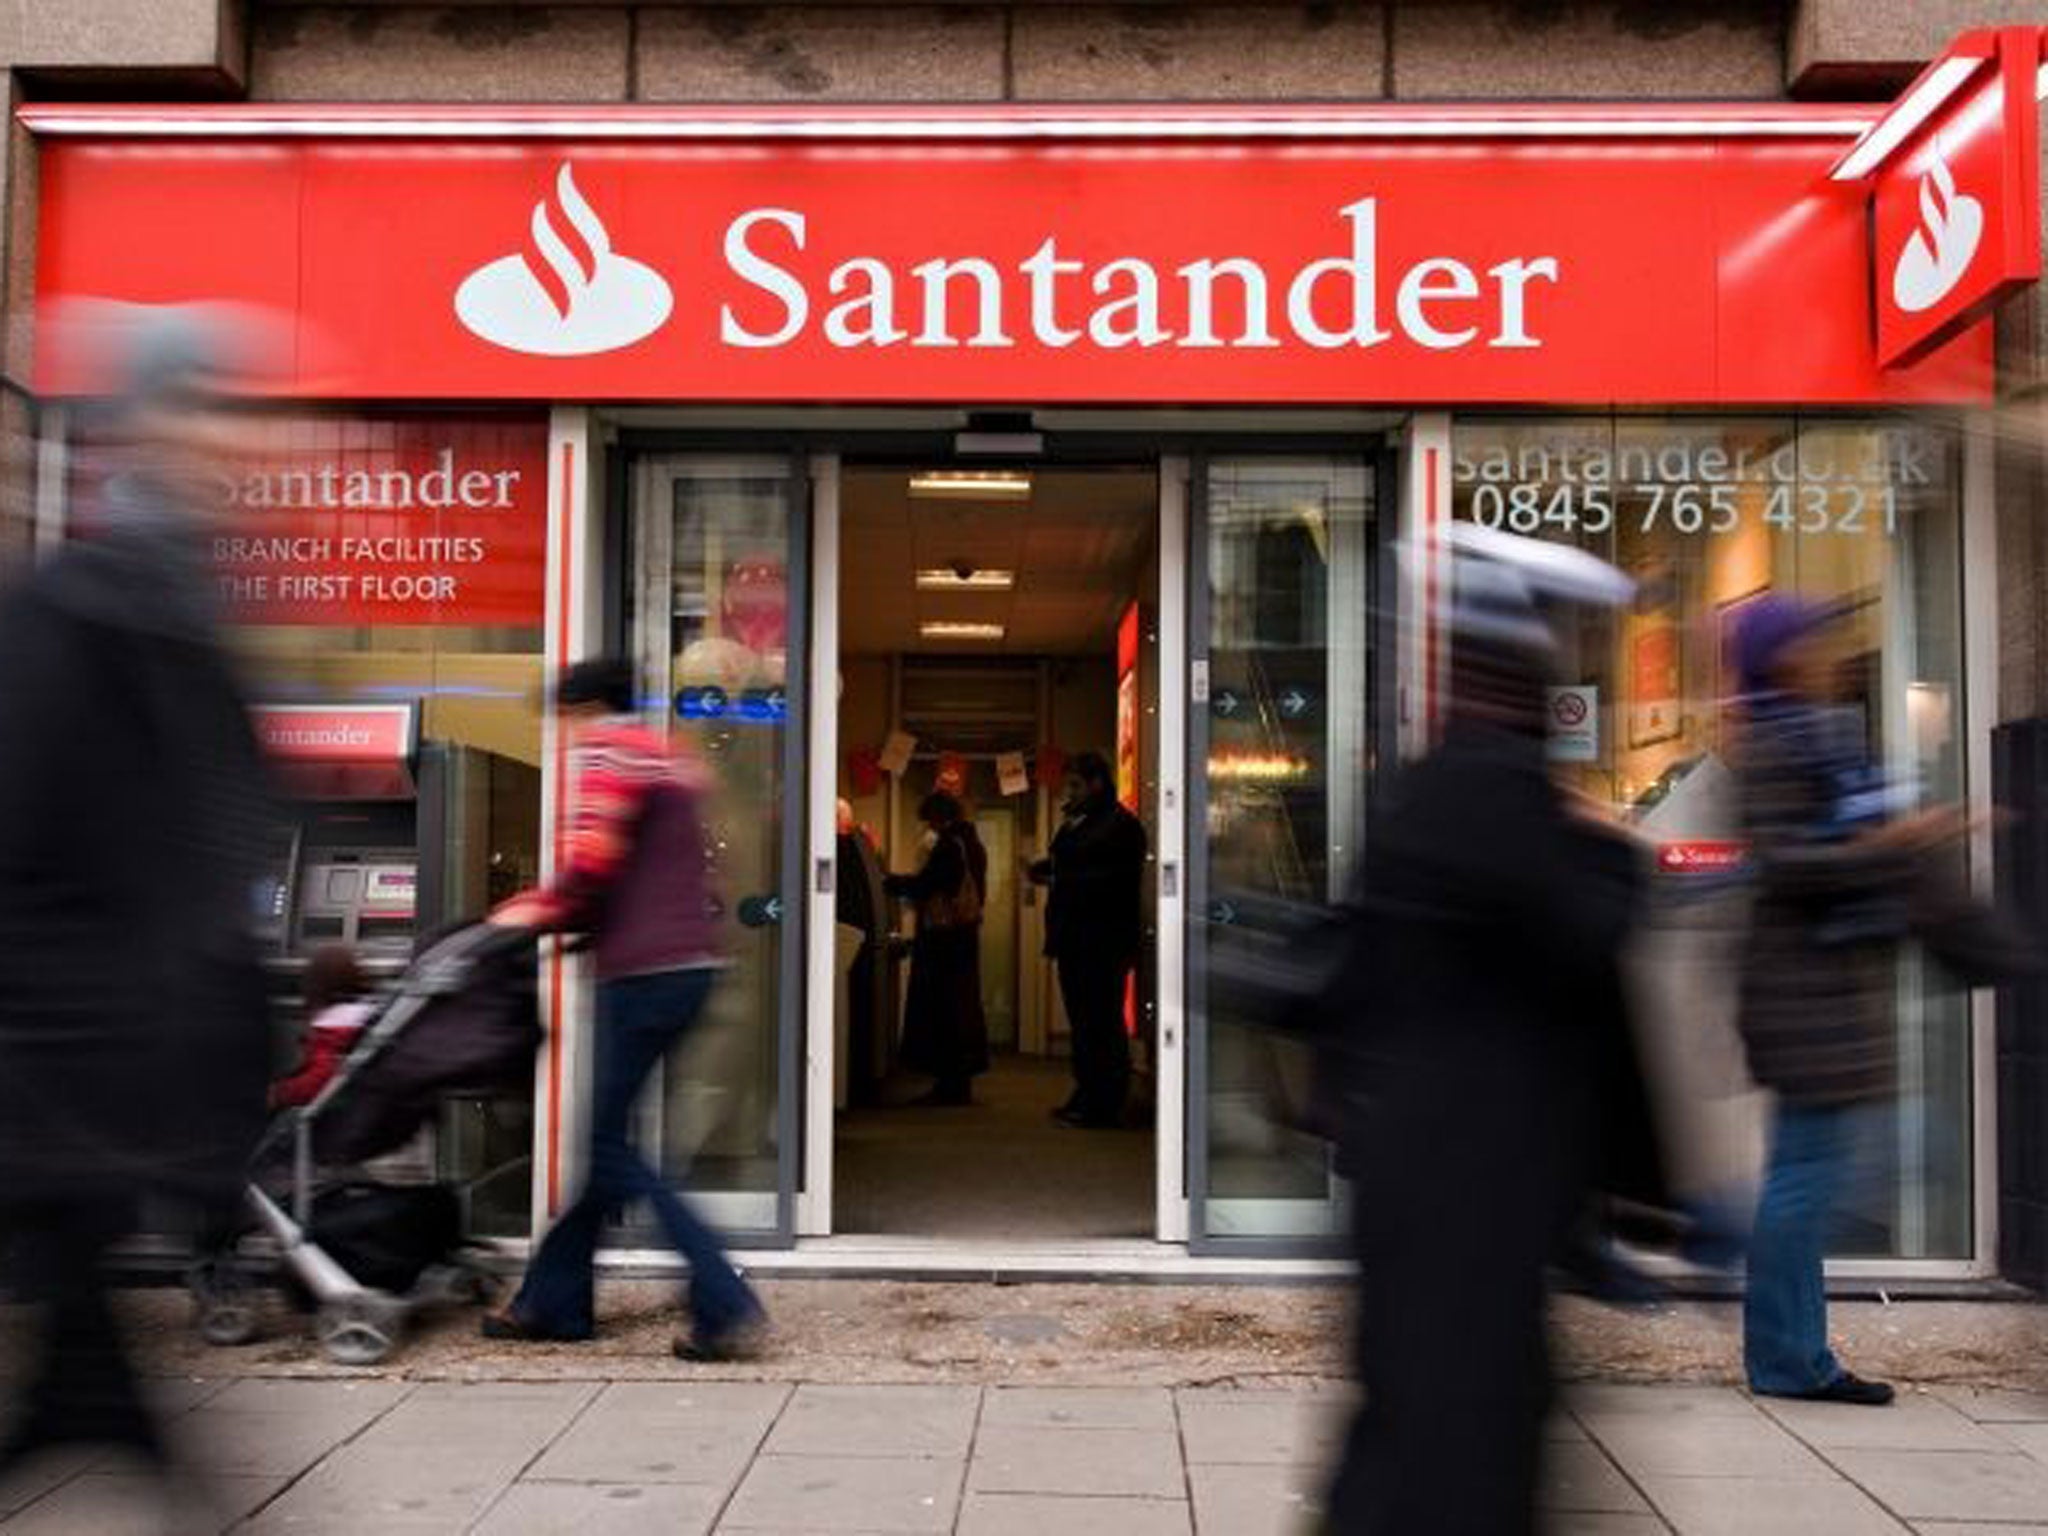 Santander, the euro zone's biggest bank by market value, reported net profit of €1.87bn (£1.59bn) in the first three months of the year, well ahead of analysts' forecasts